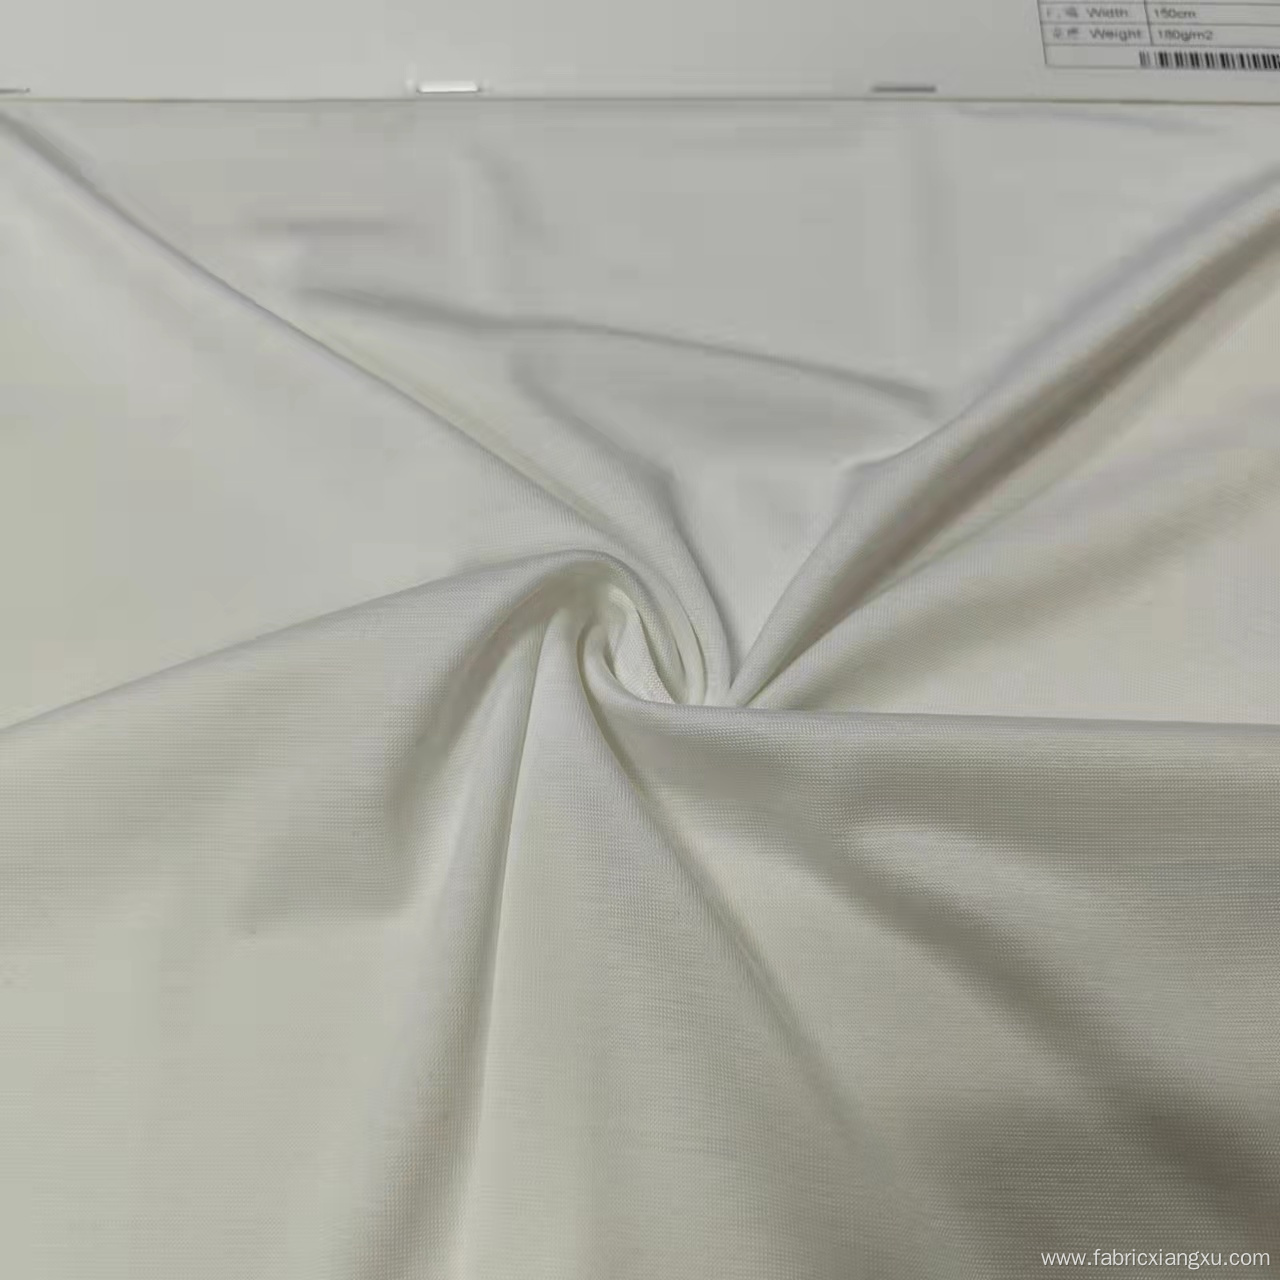 jersey knitted Fabric For Apparel